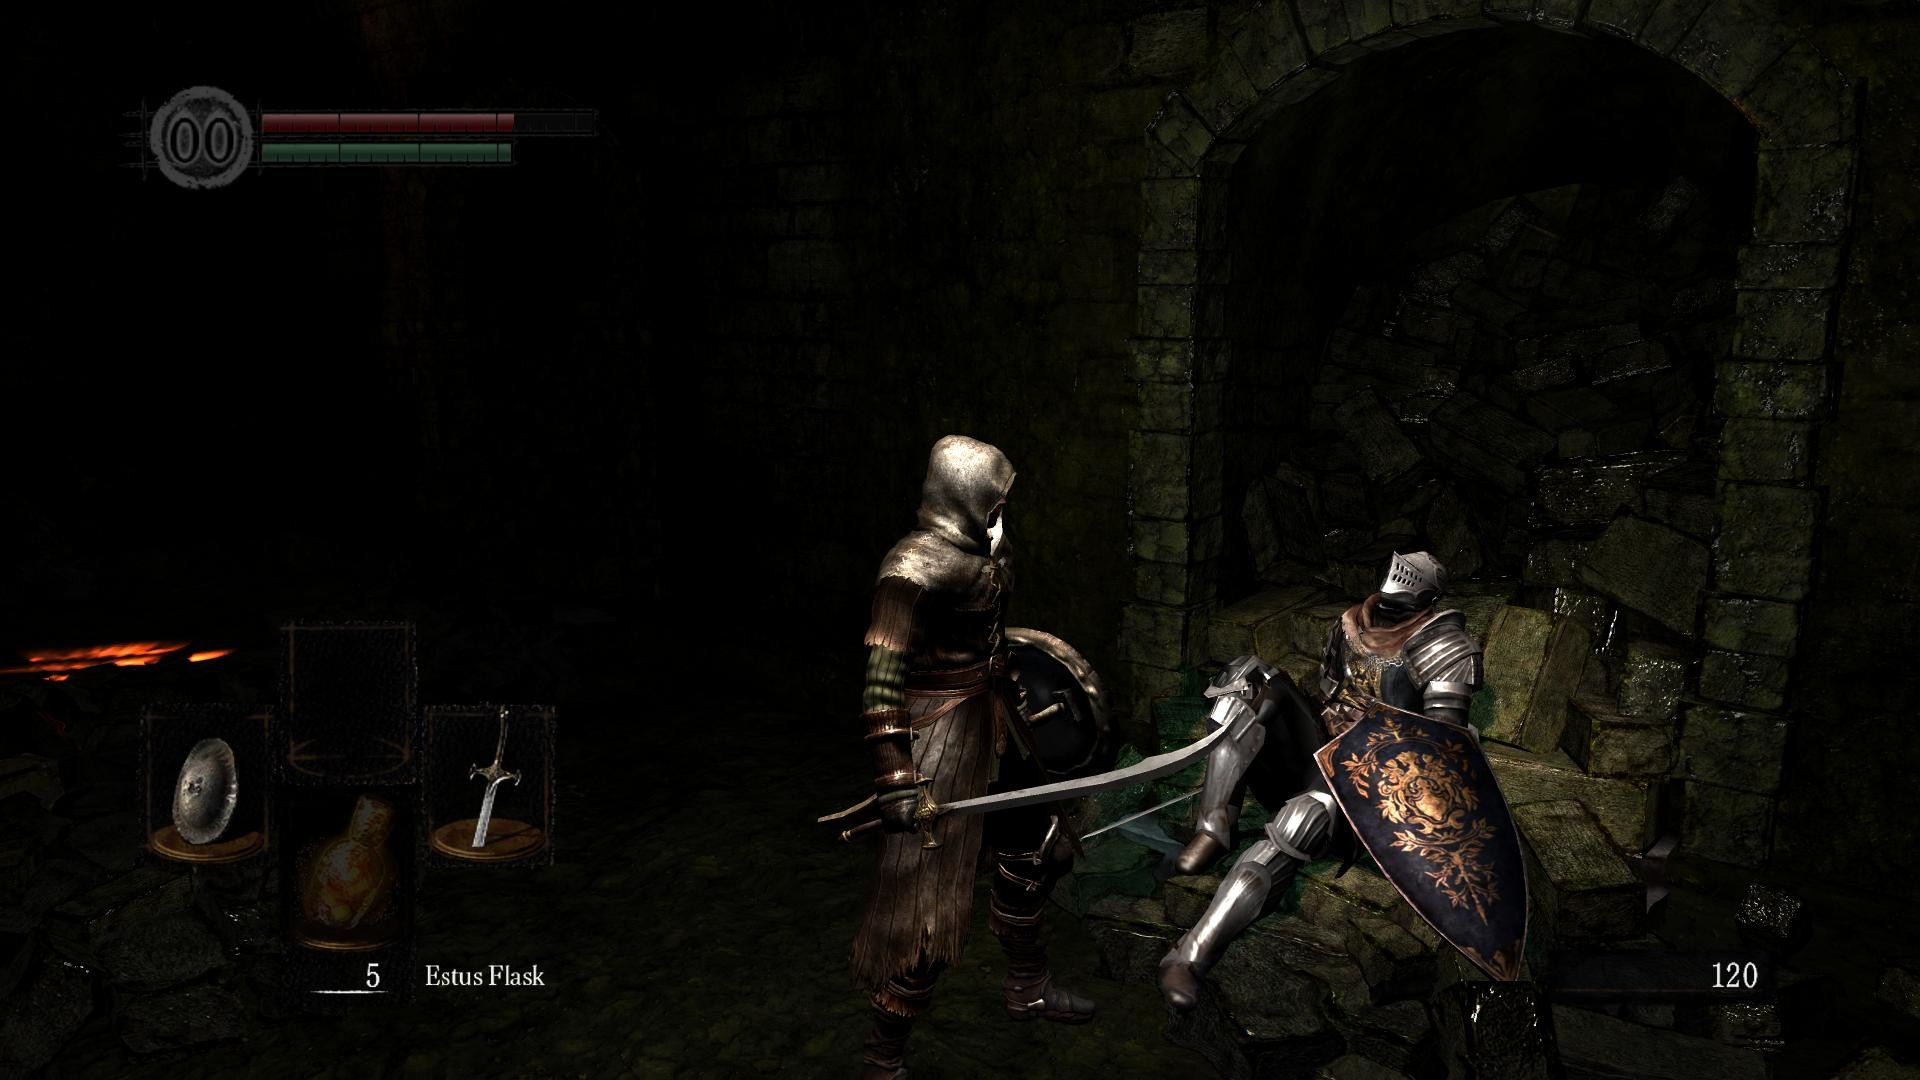 1920x1080 [PSA] Dark Souls PC has a fix that can enable 1080P [link in comments] ...